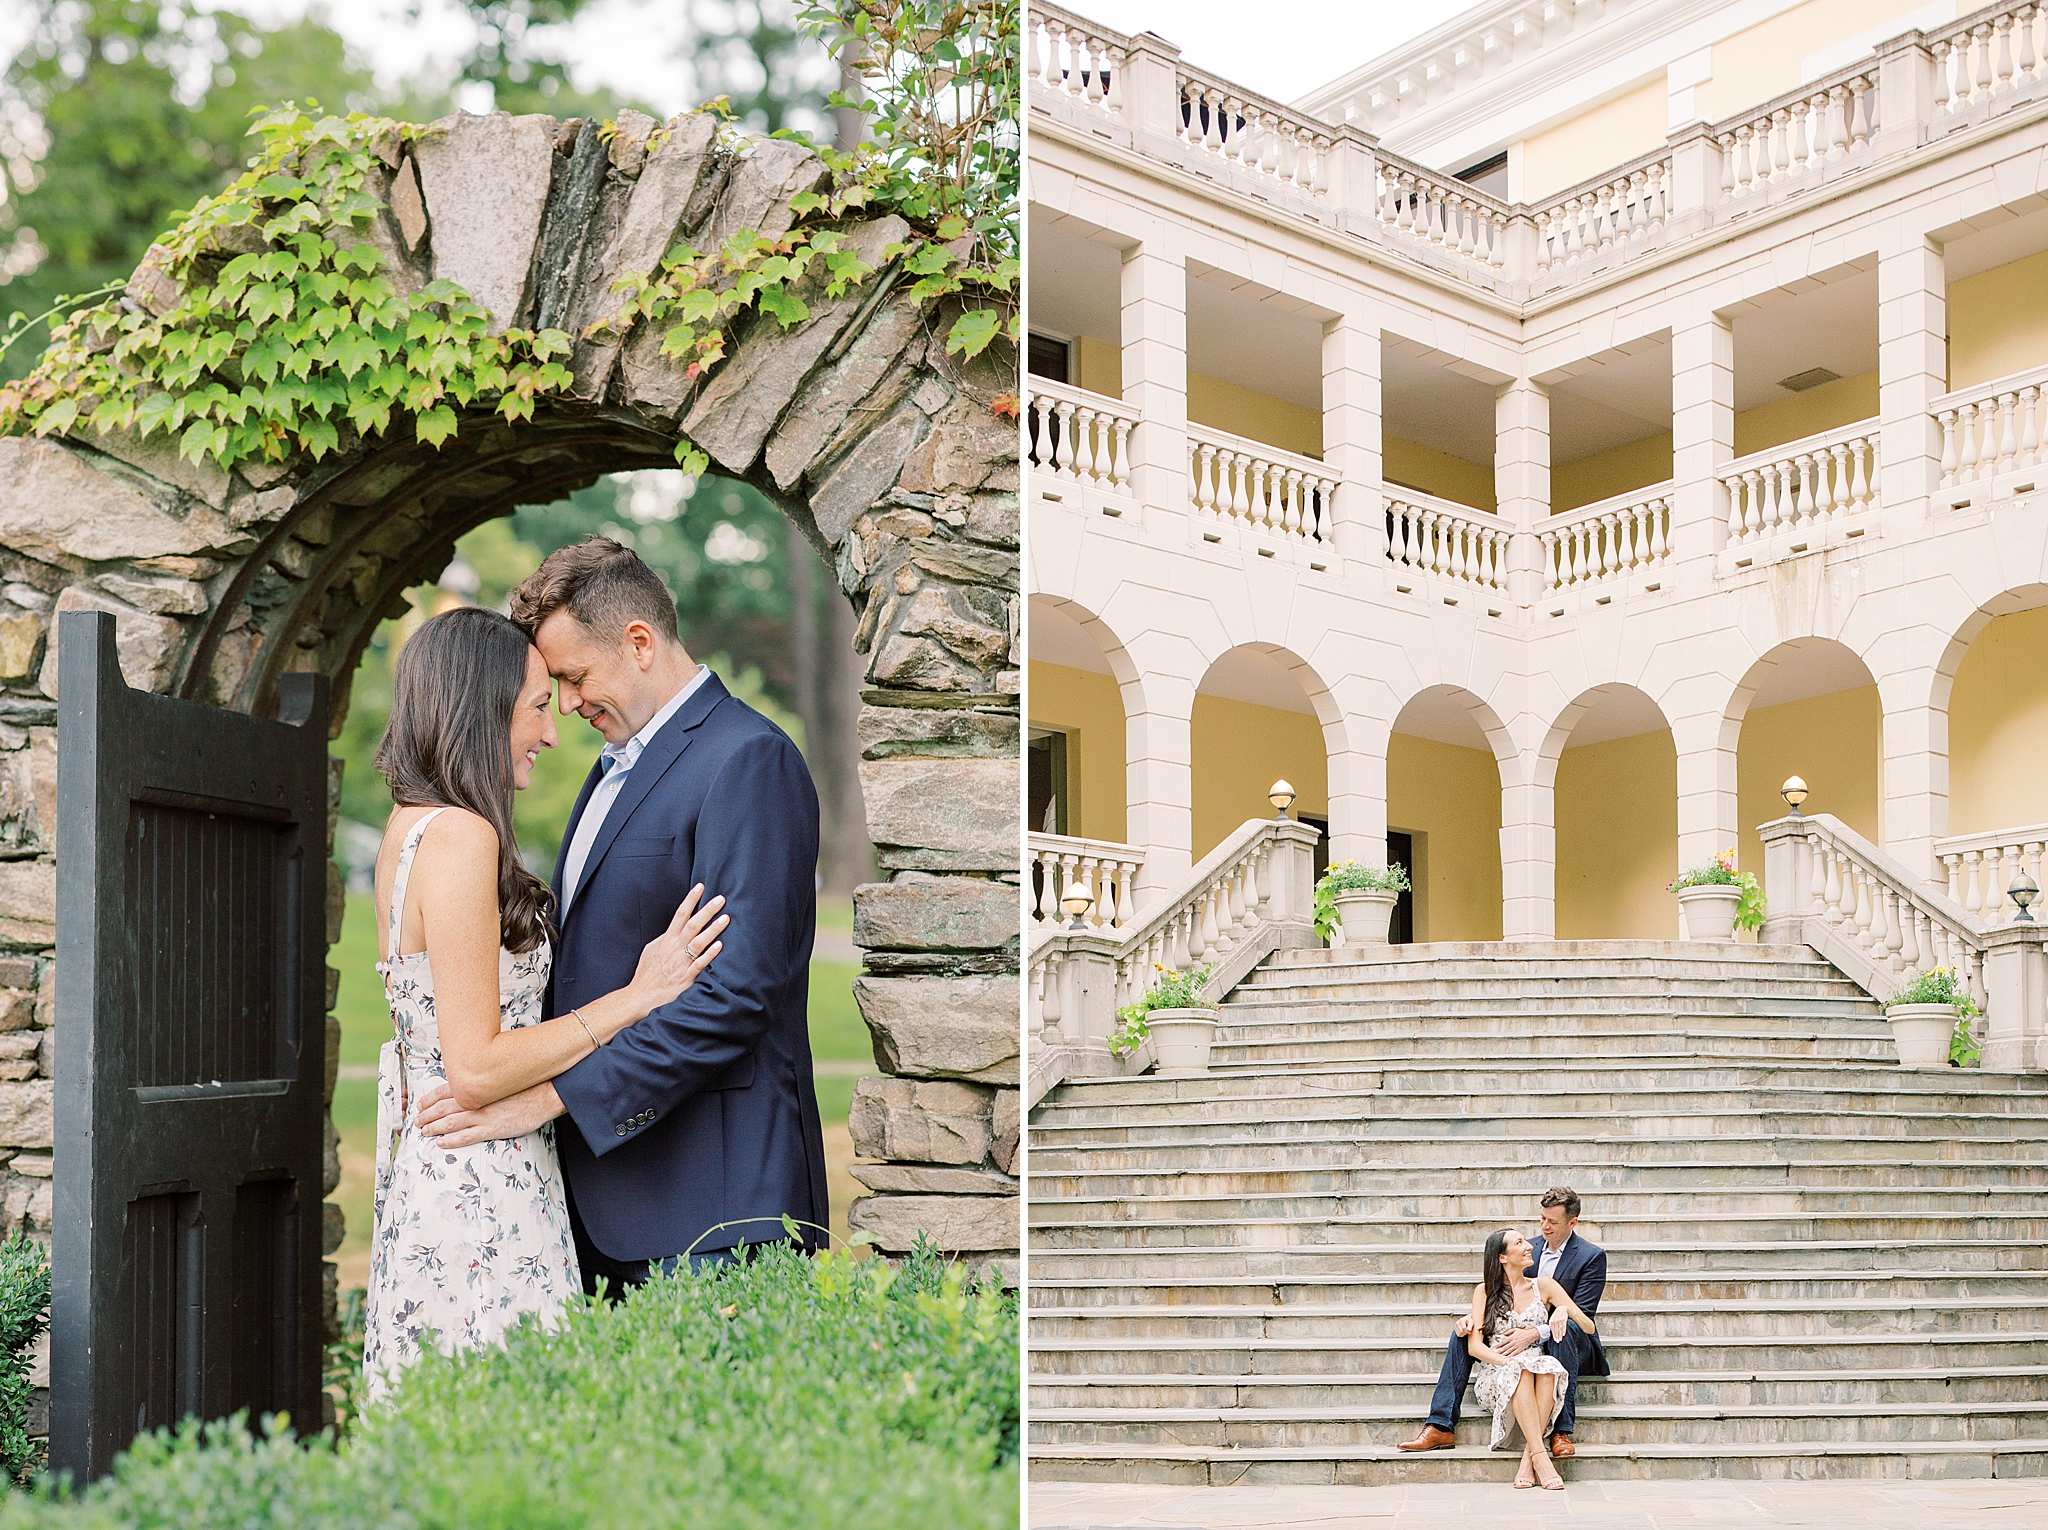 An elegant garden engagement session at Airlie Center in Warrenton, VA featuring a goldendoodle puppy.